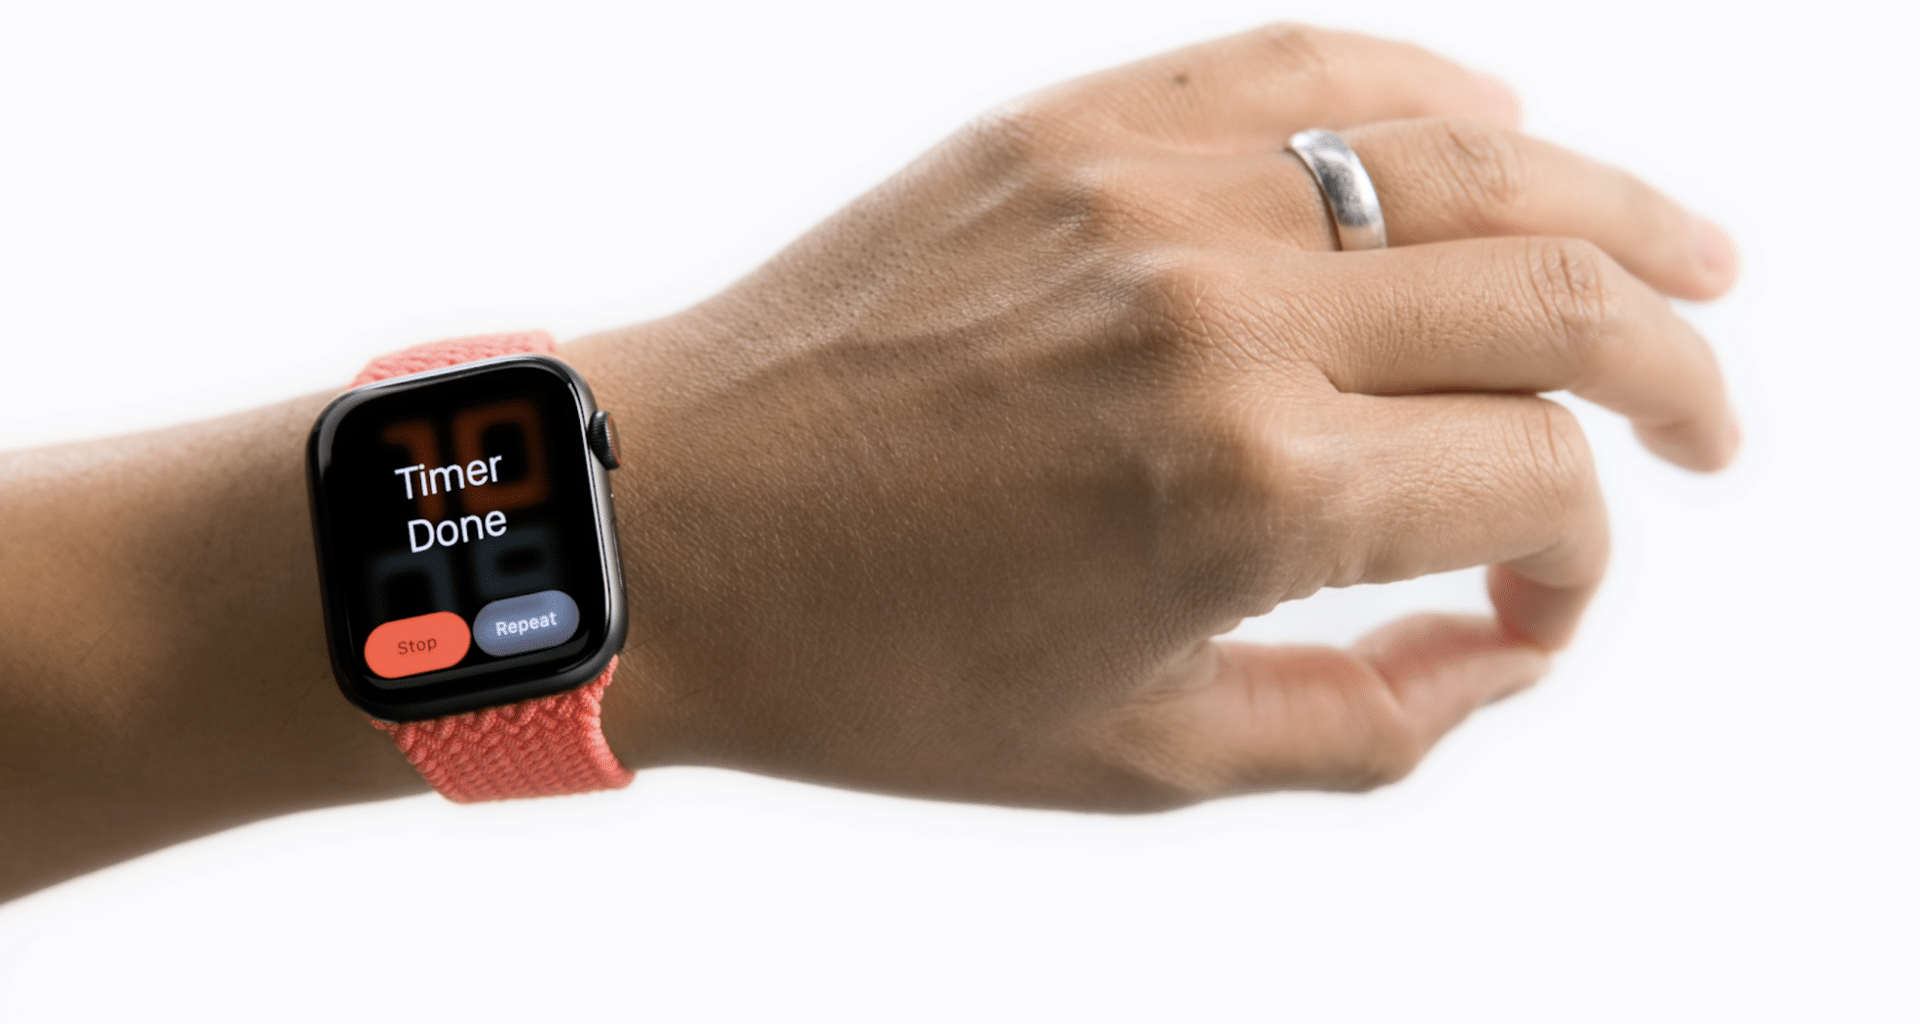 AssistiveTouch do Apple Watch